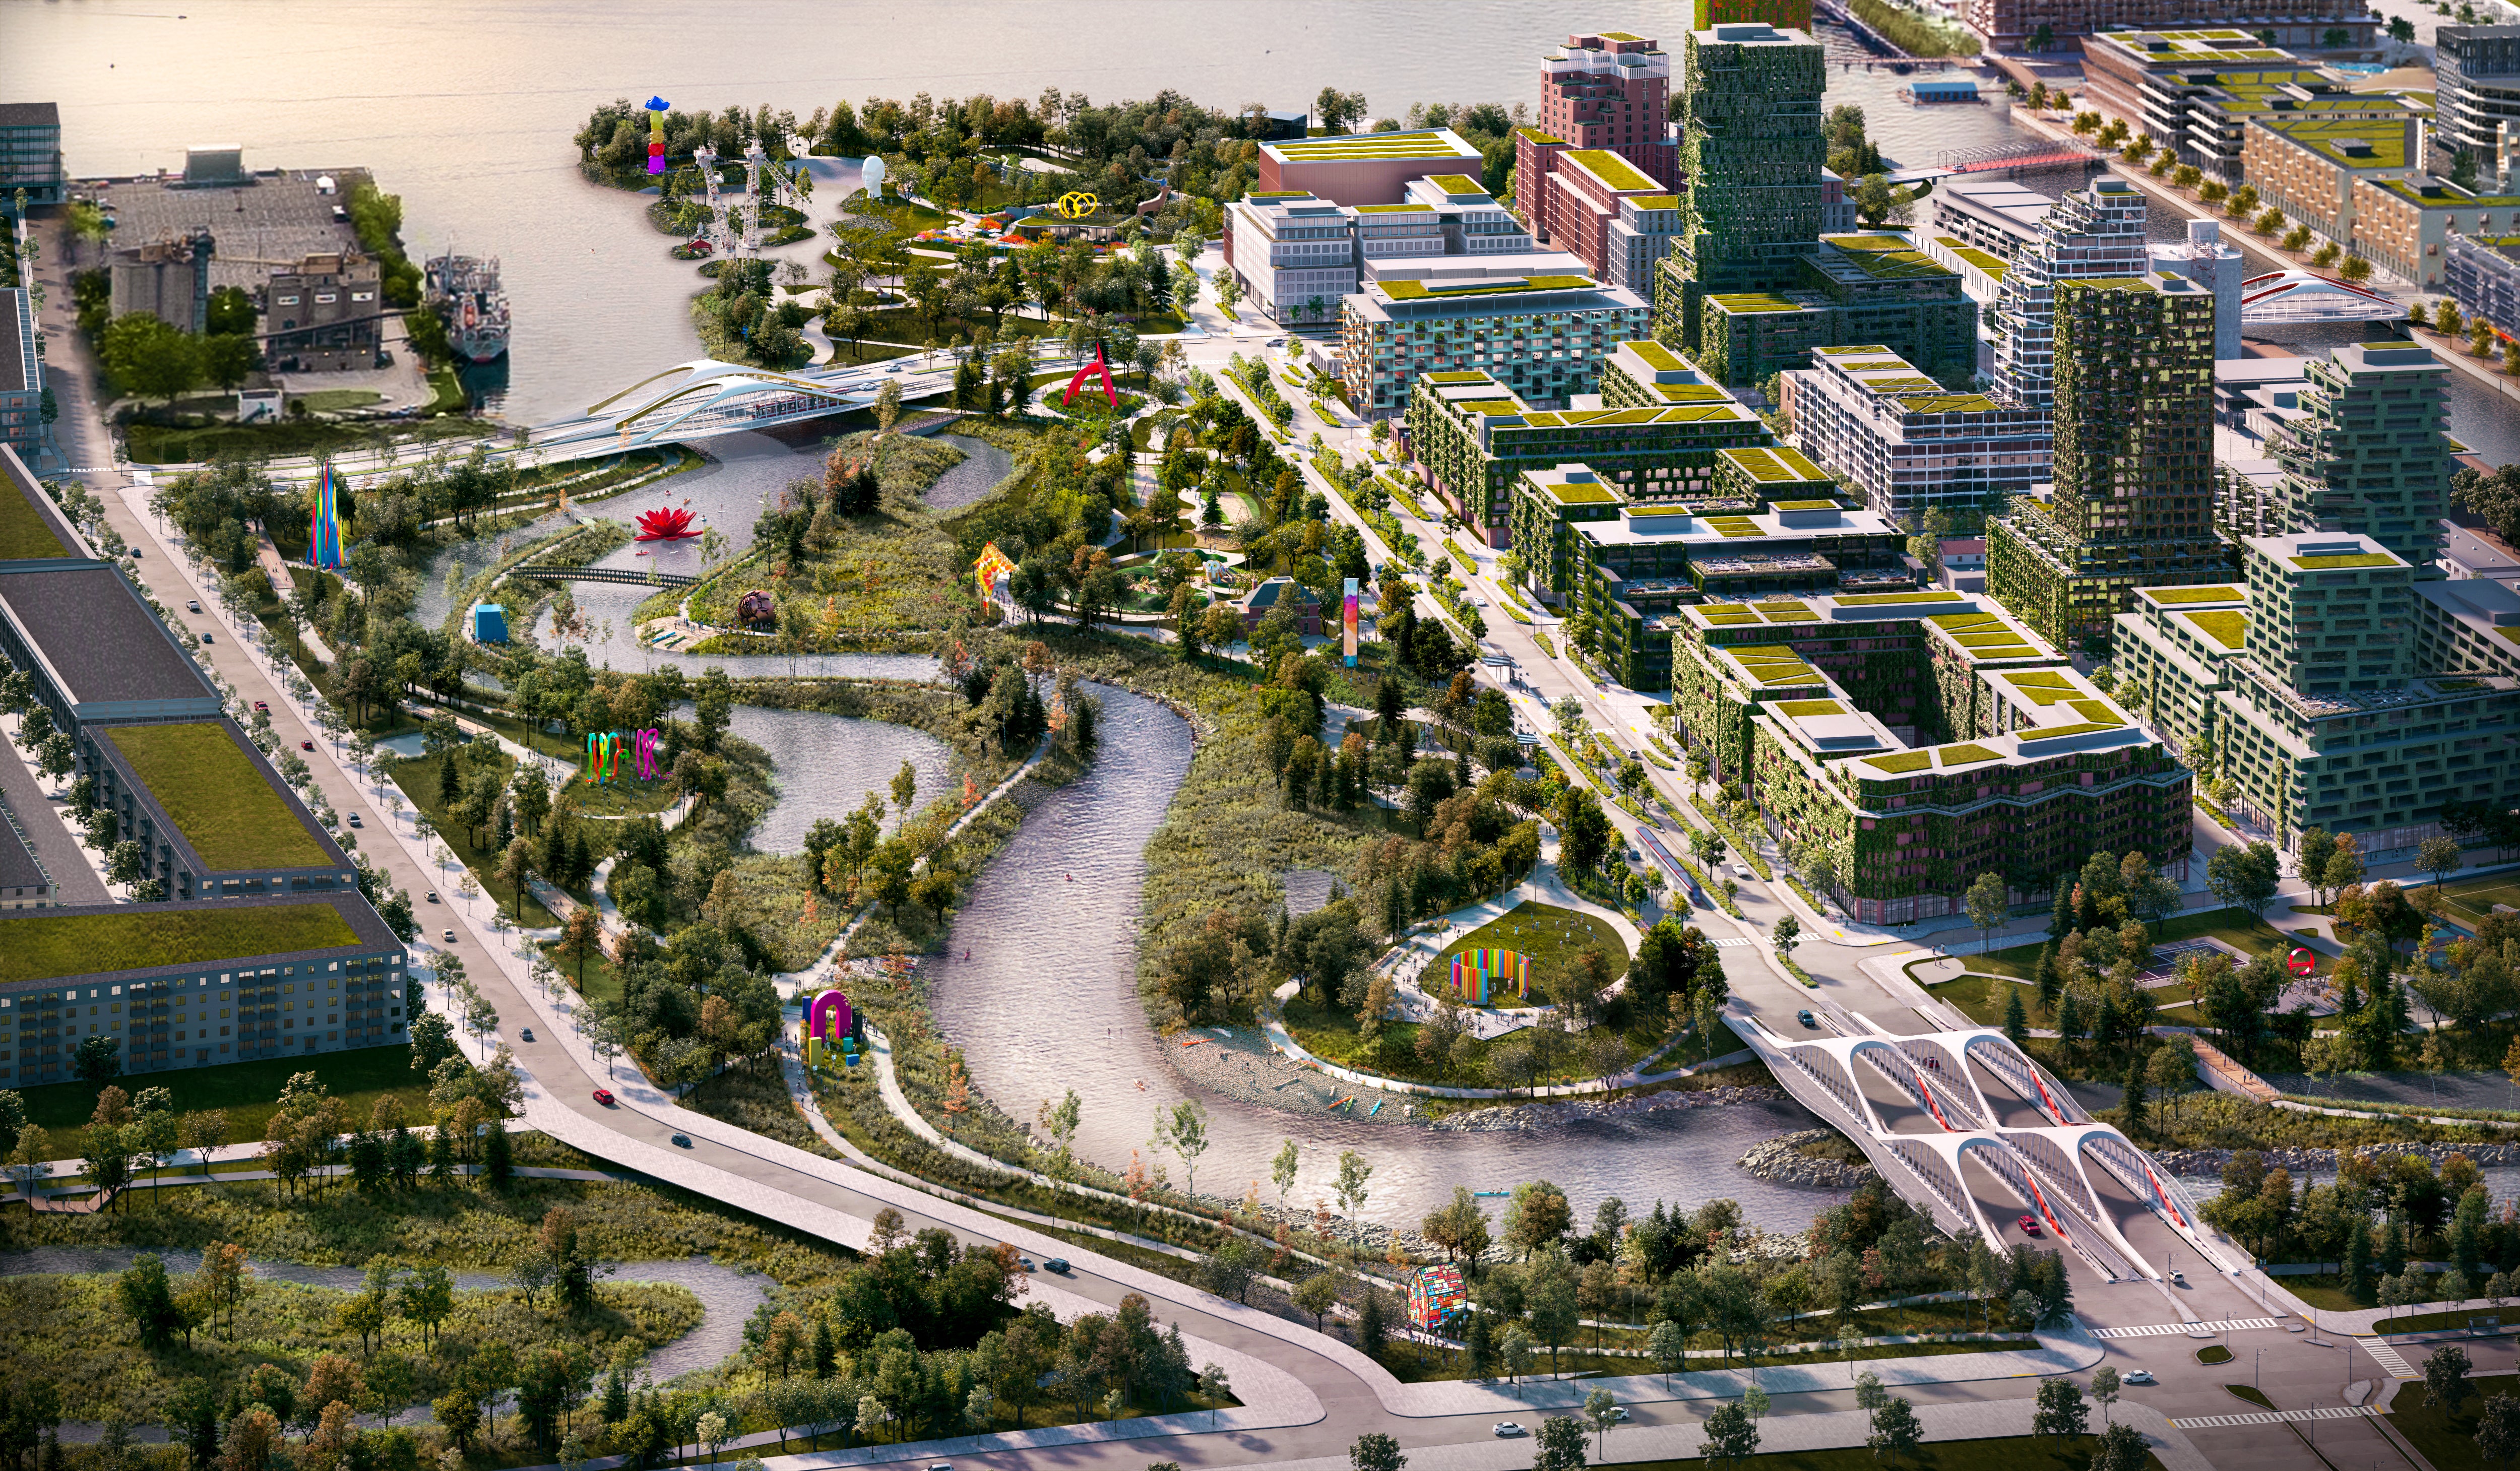 artist rendering that shows an art trail along the waterfront